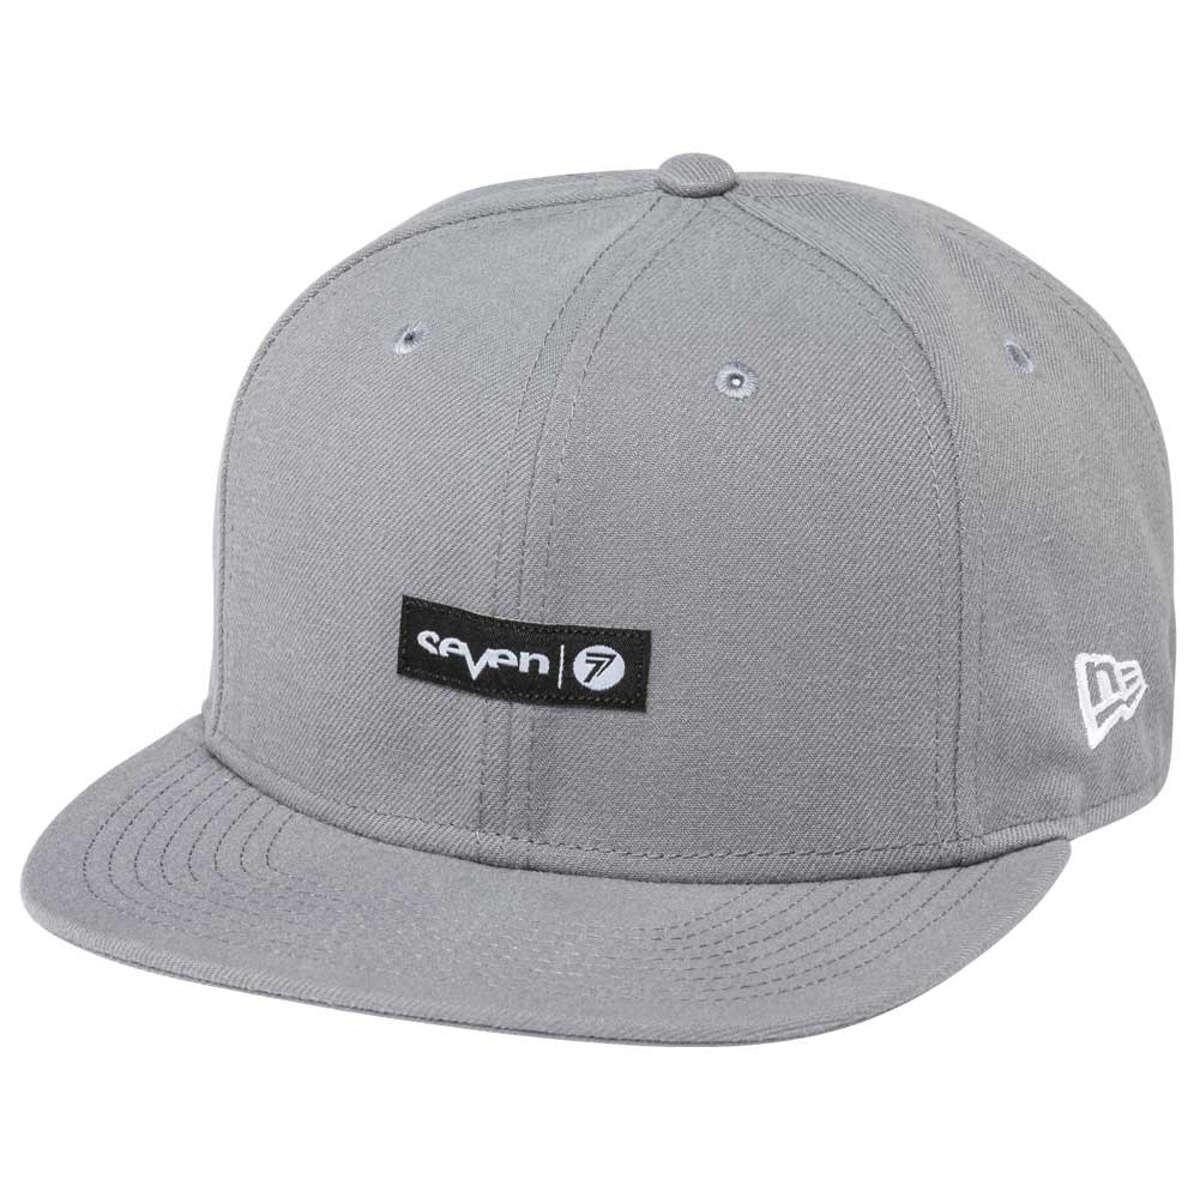 Seven MX Cappellino Snap Back Authentic Charcoal